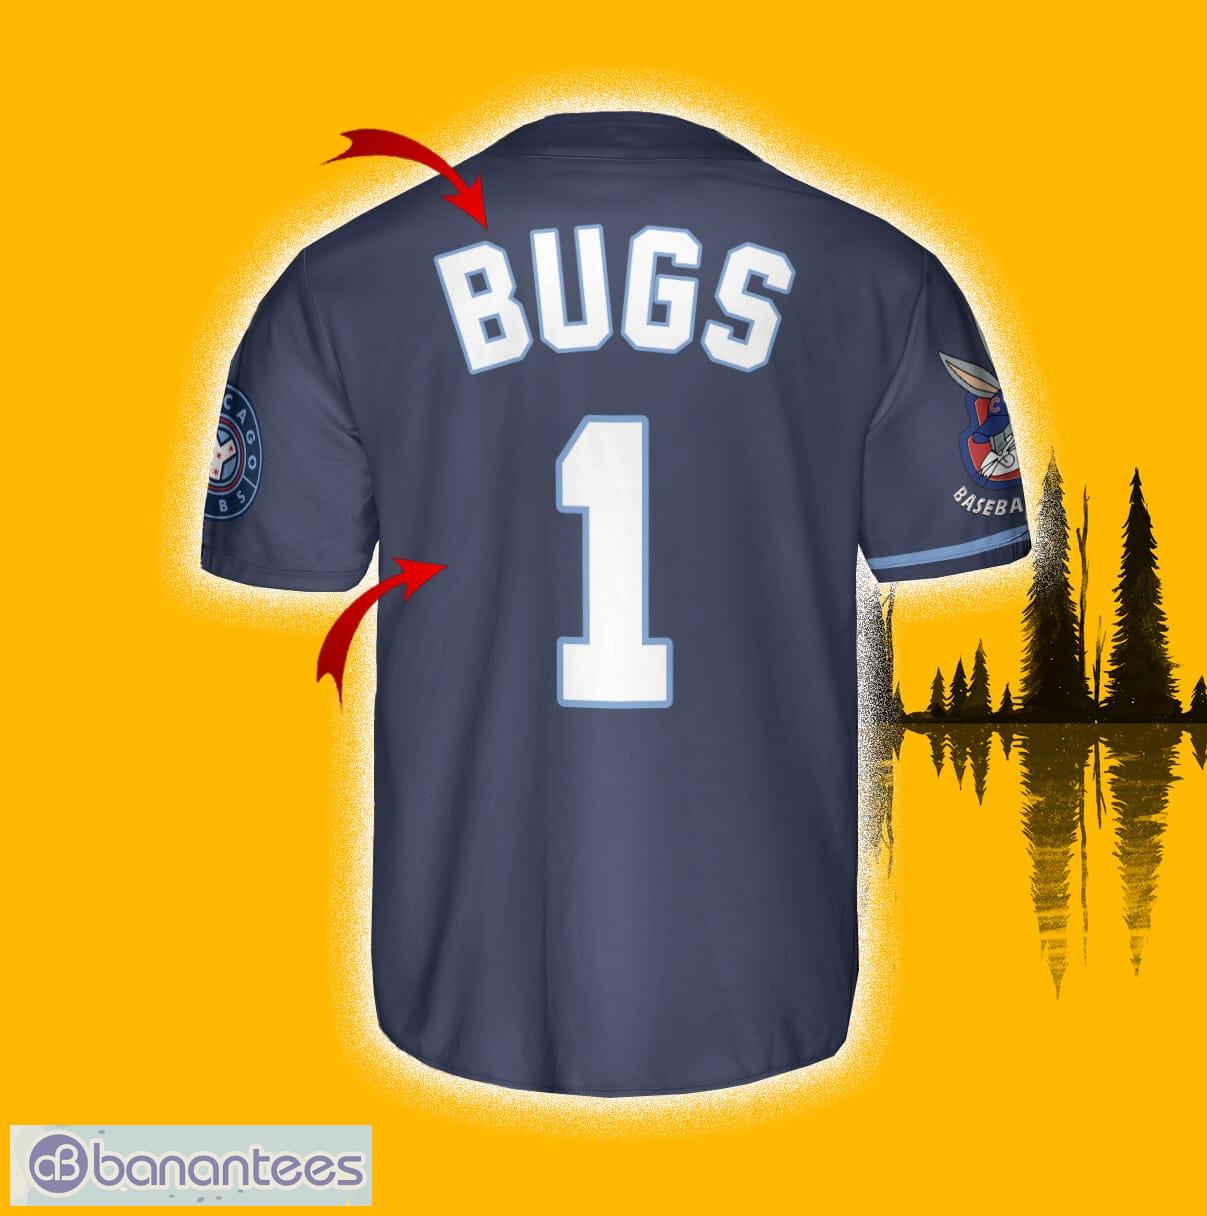 Chicago Cubs Looney Tunes Bugs Bunny Jersey Baseball ShirtBL